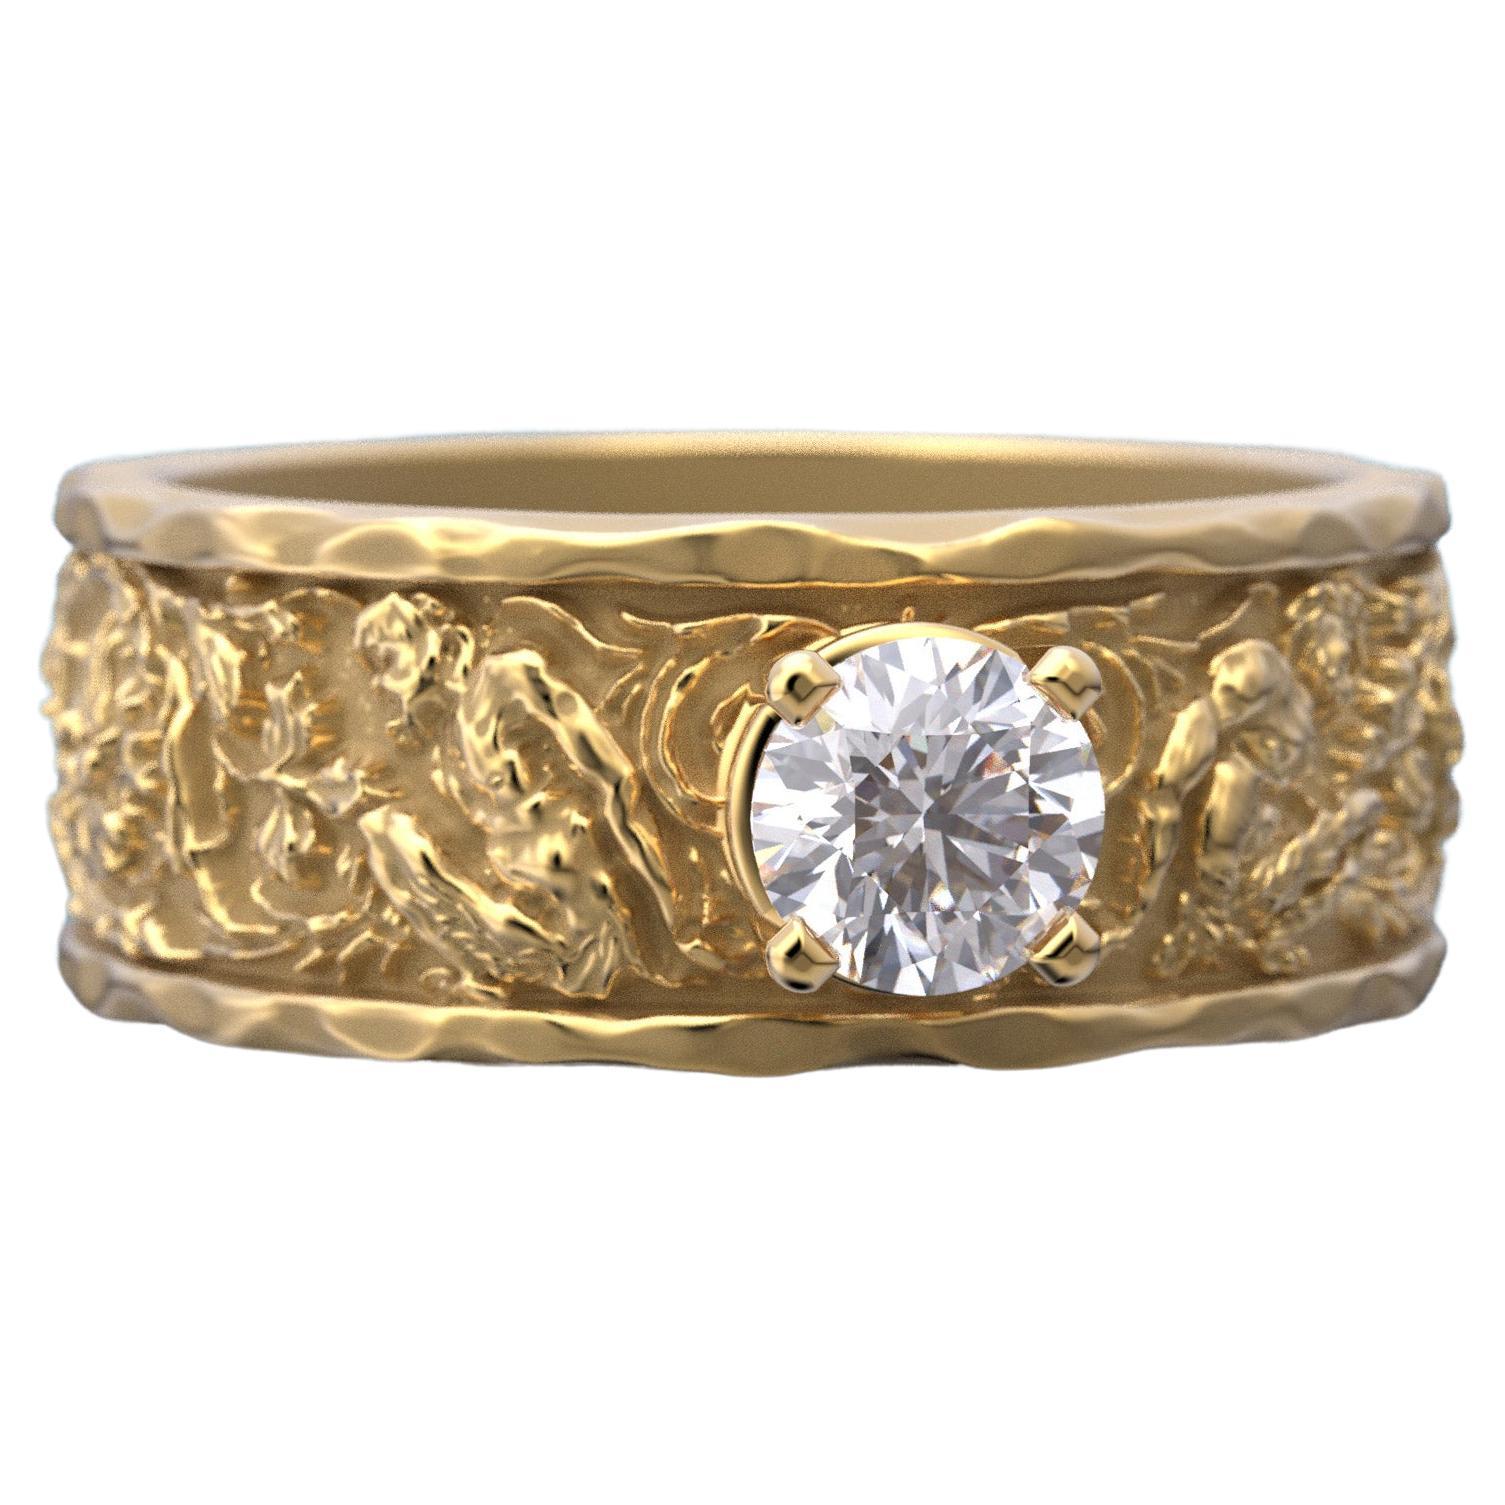 For Sale:  Half Carat Diamond Men's Gold Band in 14k Gold, Designed and Crafted in Italy